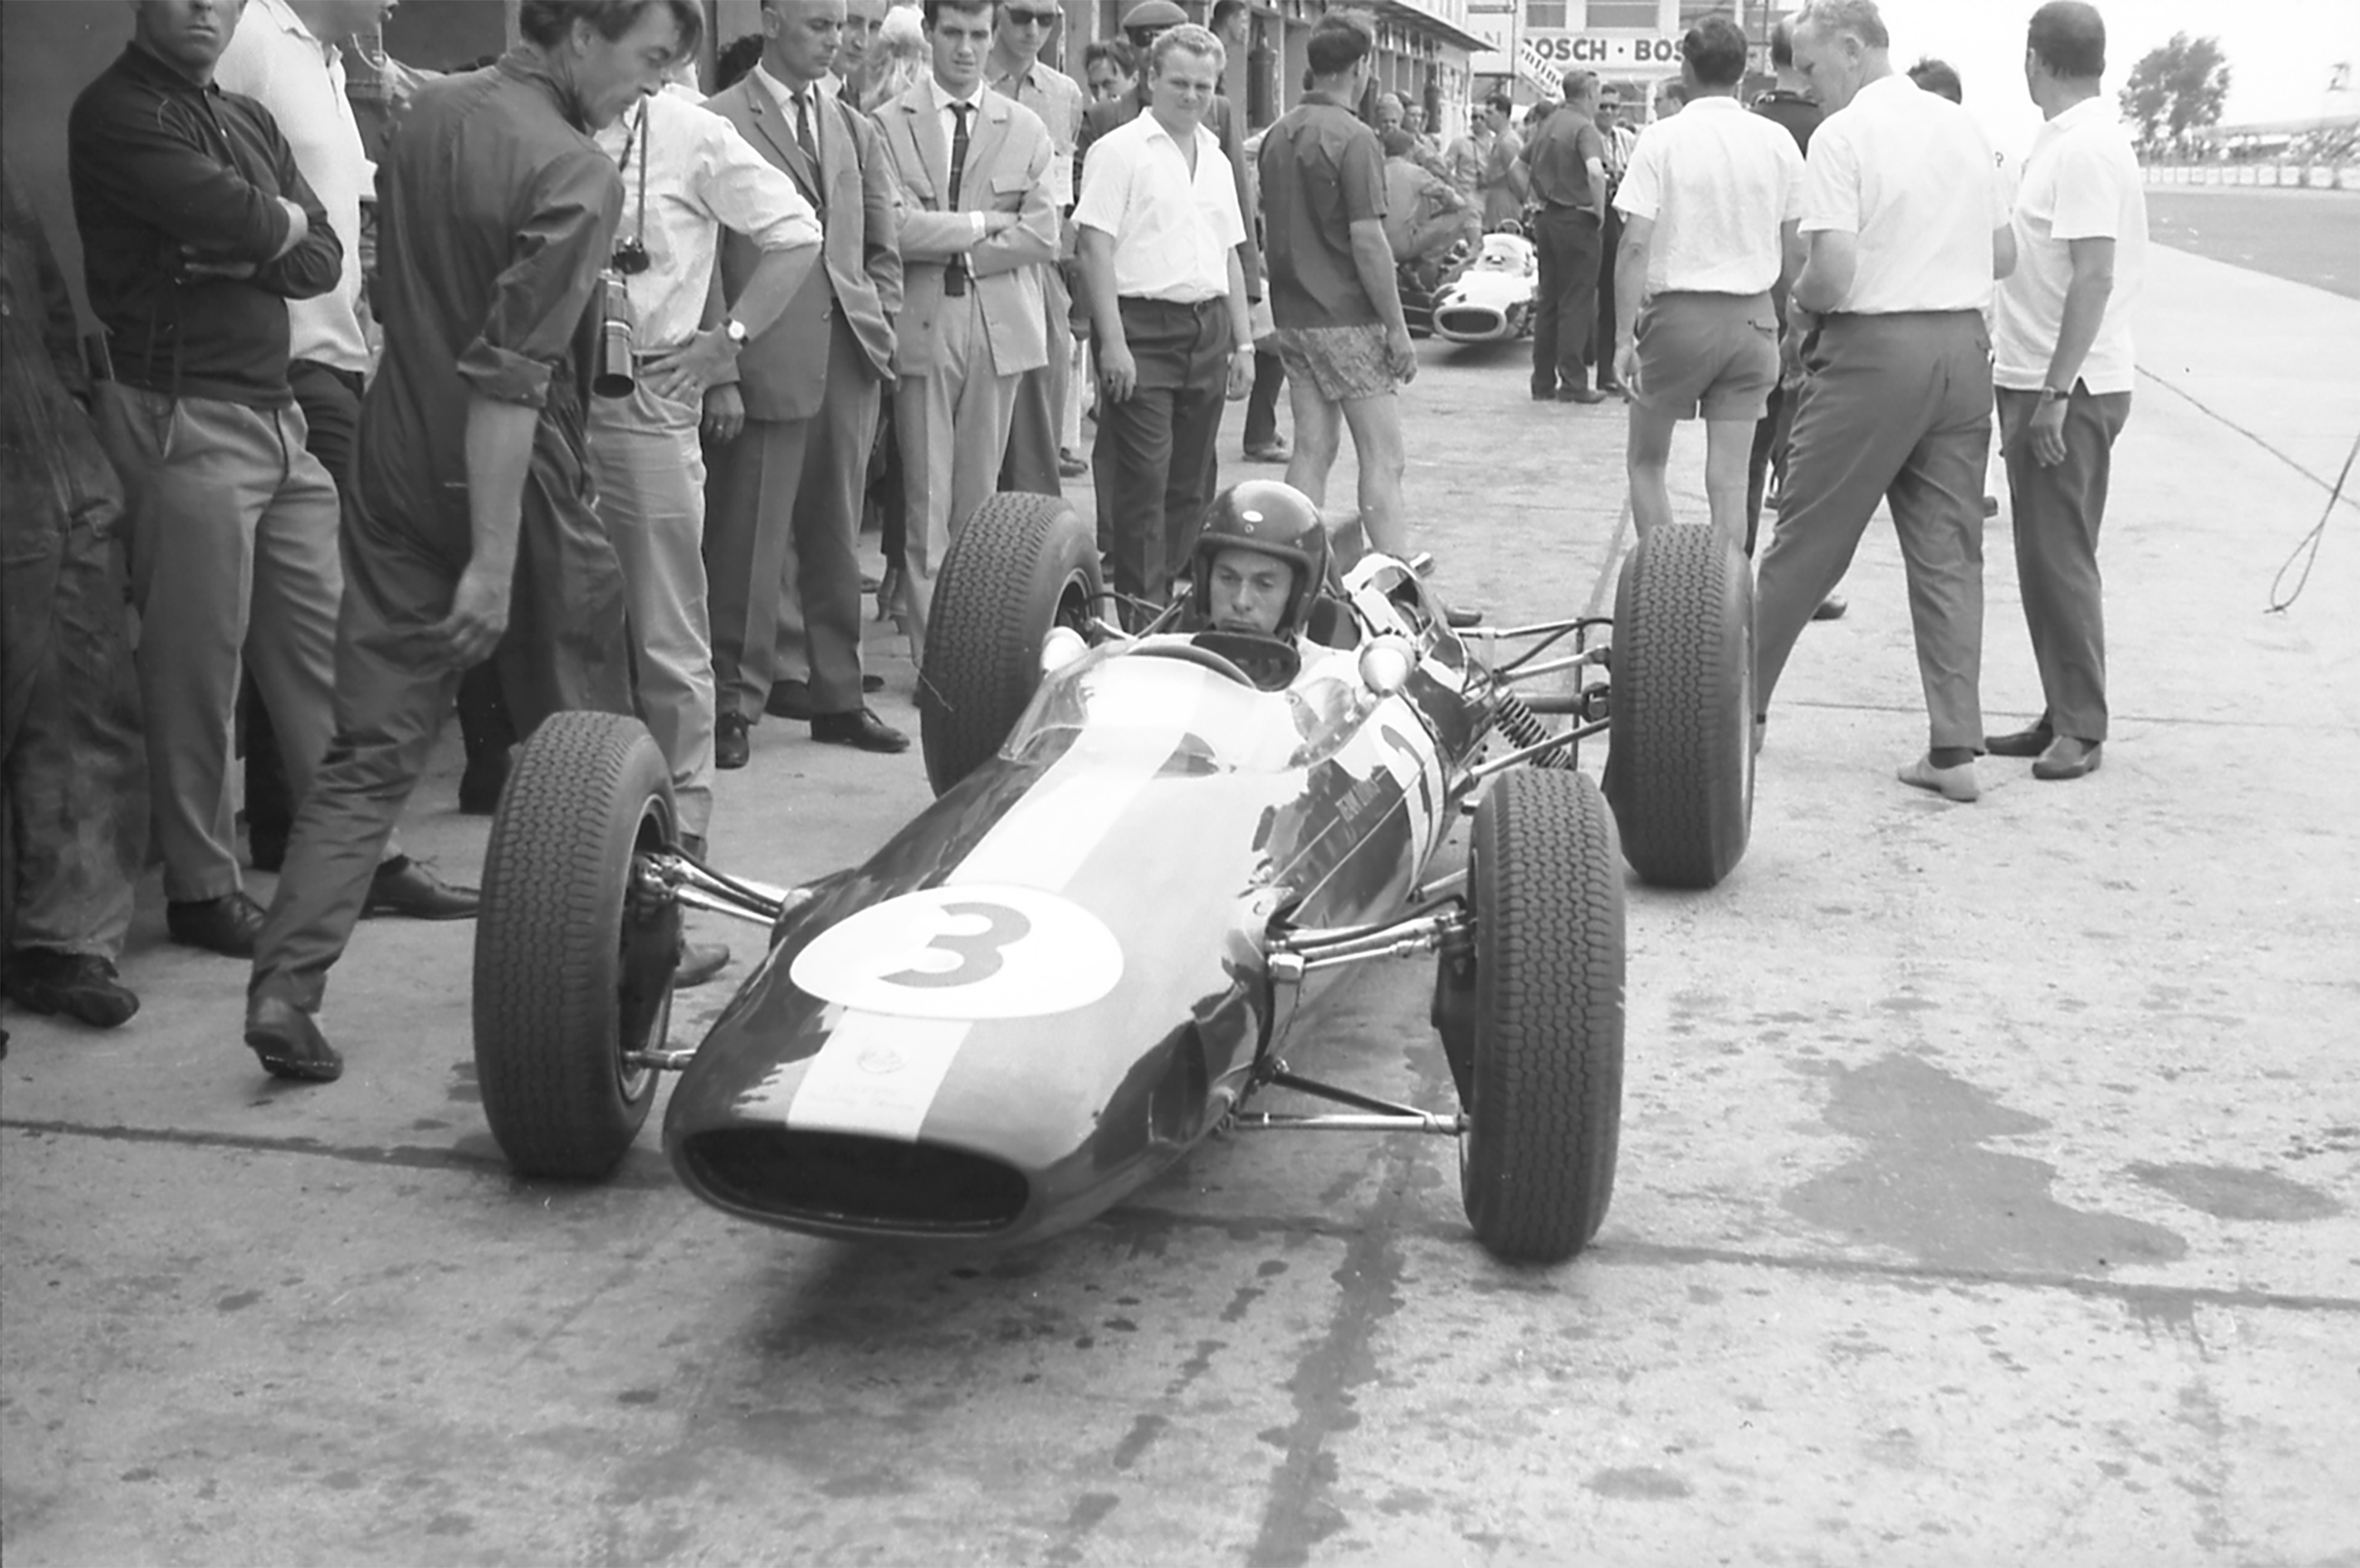 Thoughtful Jim in his works Lotus-Climax 25 just before finishing second to John Surtees’s Ferrari in the 1963 German Grand Prix at the Nurburgring - Jim Endruweit overalled to the left again...